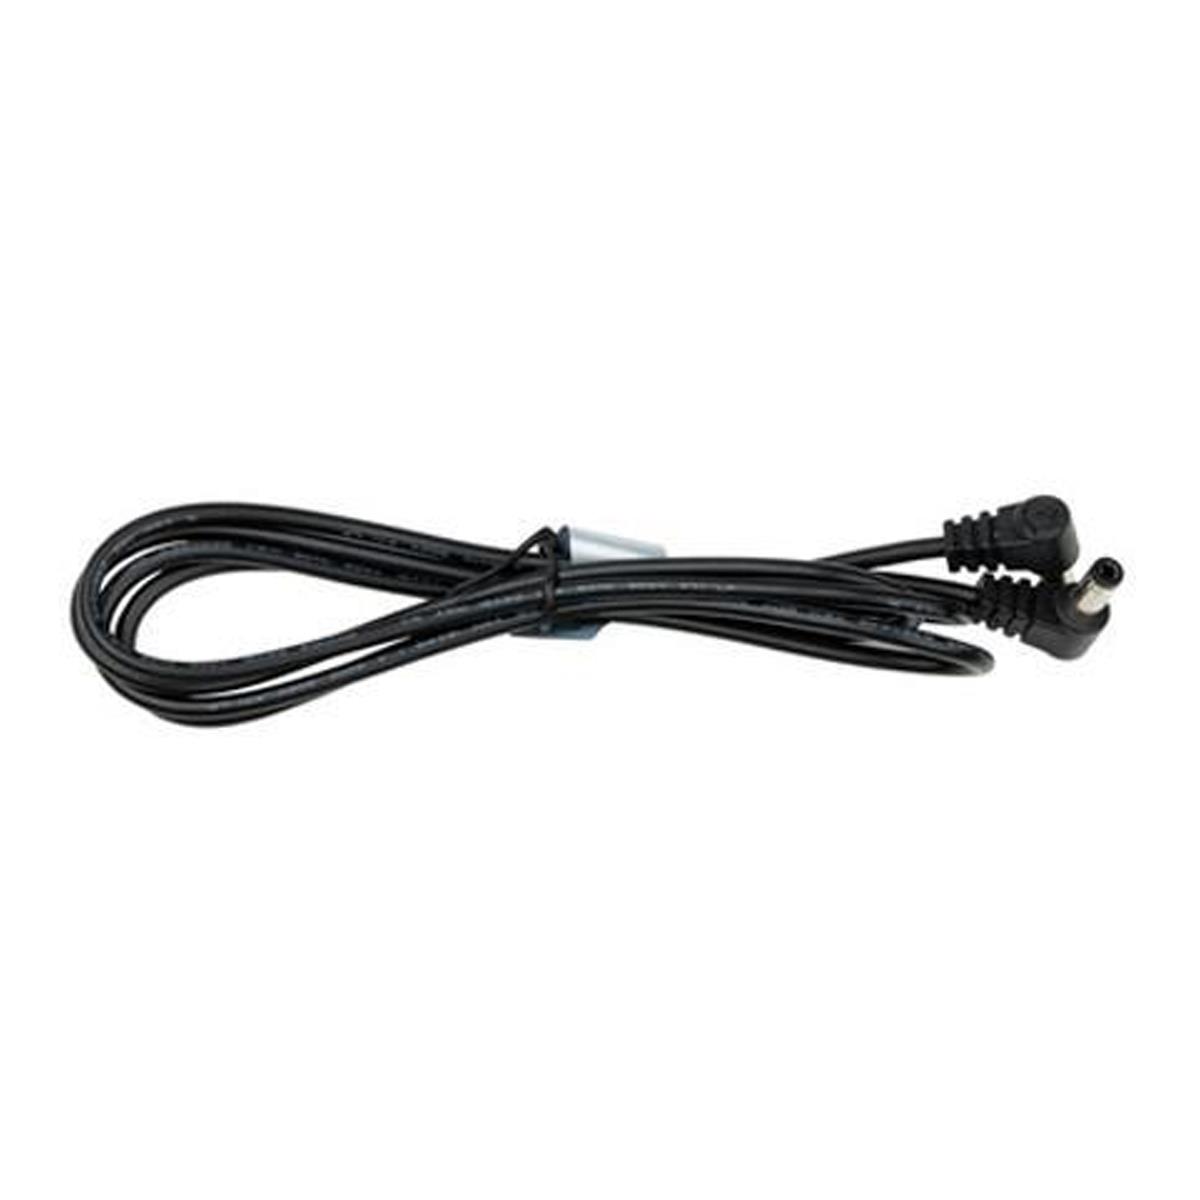 Image of Tilta Monitor Connection Cable for Tilta Power Supply Systems